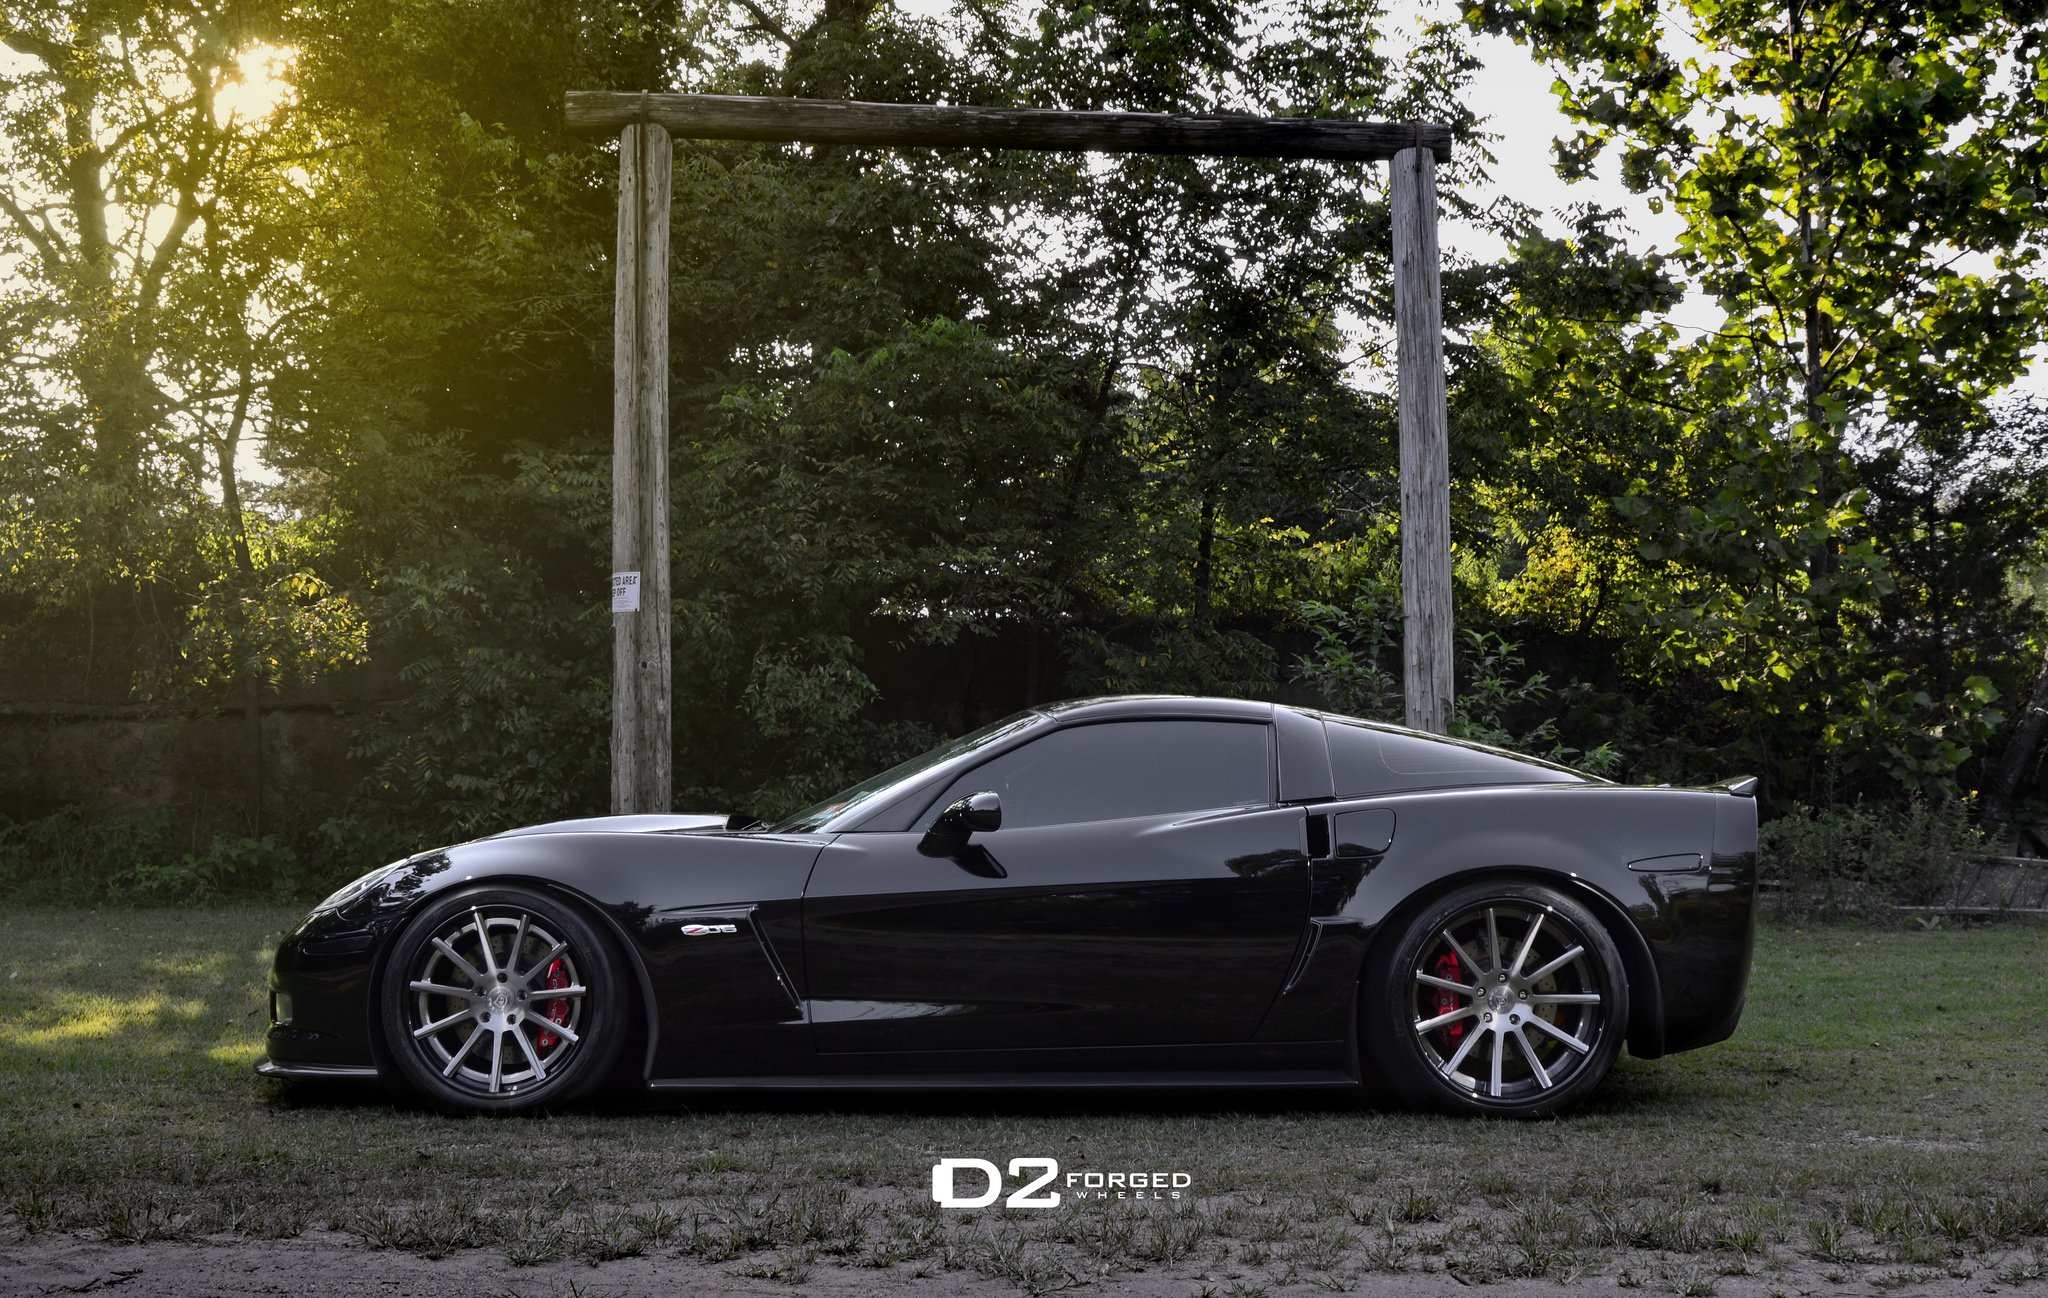 d2forged, Wheels, Tuning, Cars, Bmw, Corvette, C, 6, Coupe Wallpaper